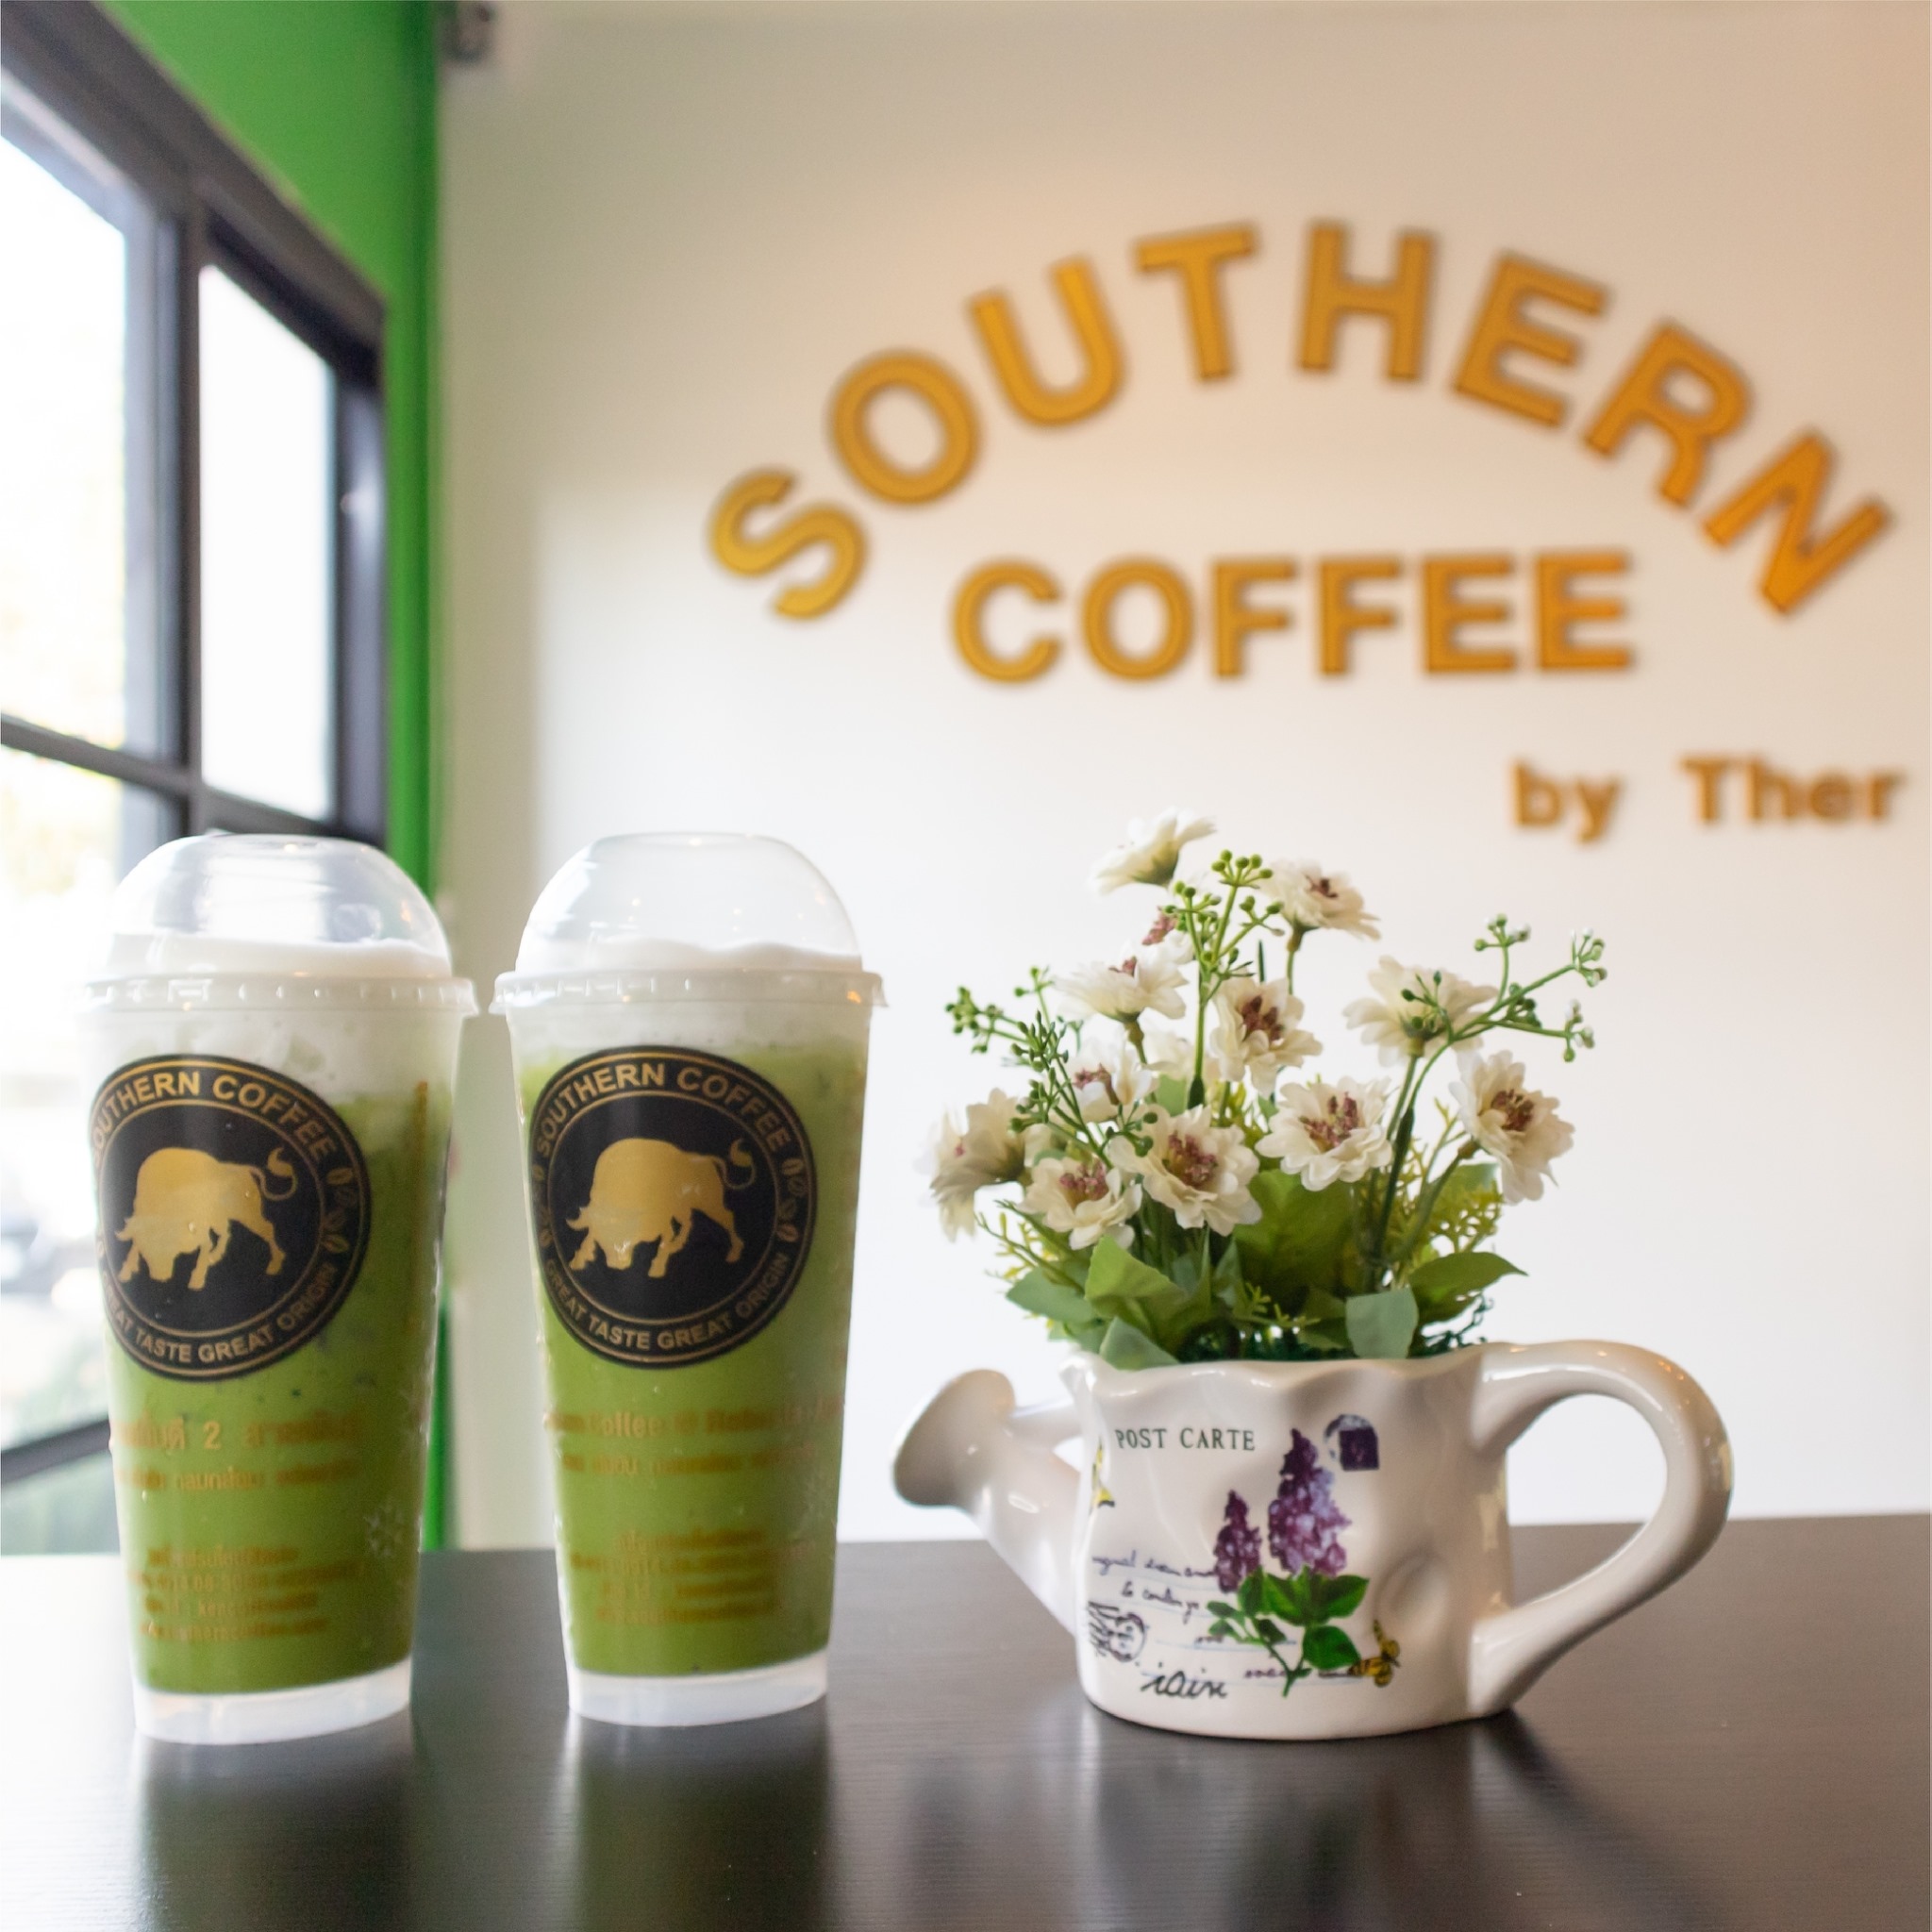 Southern Coffee by Ther อุบลสแควร์